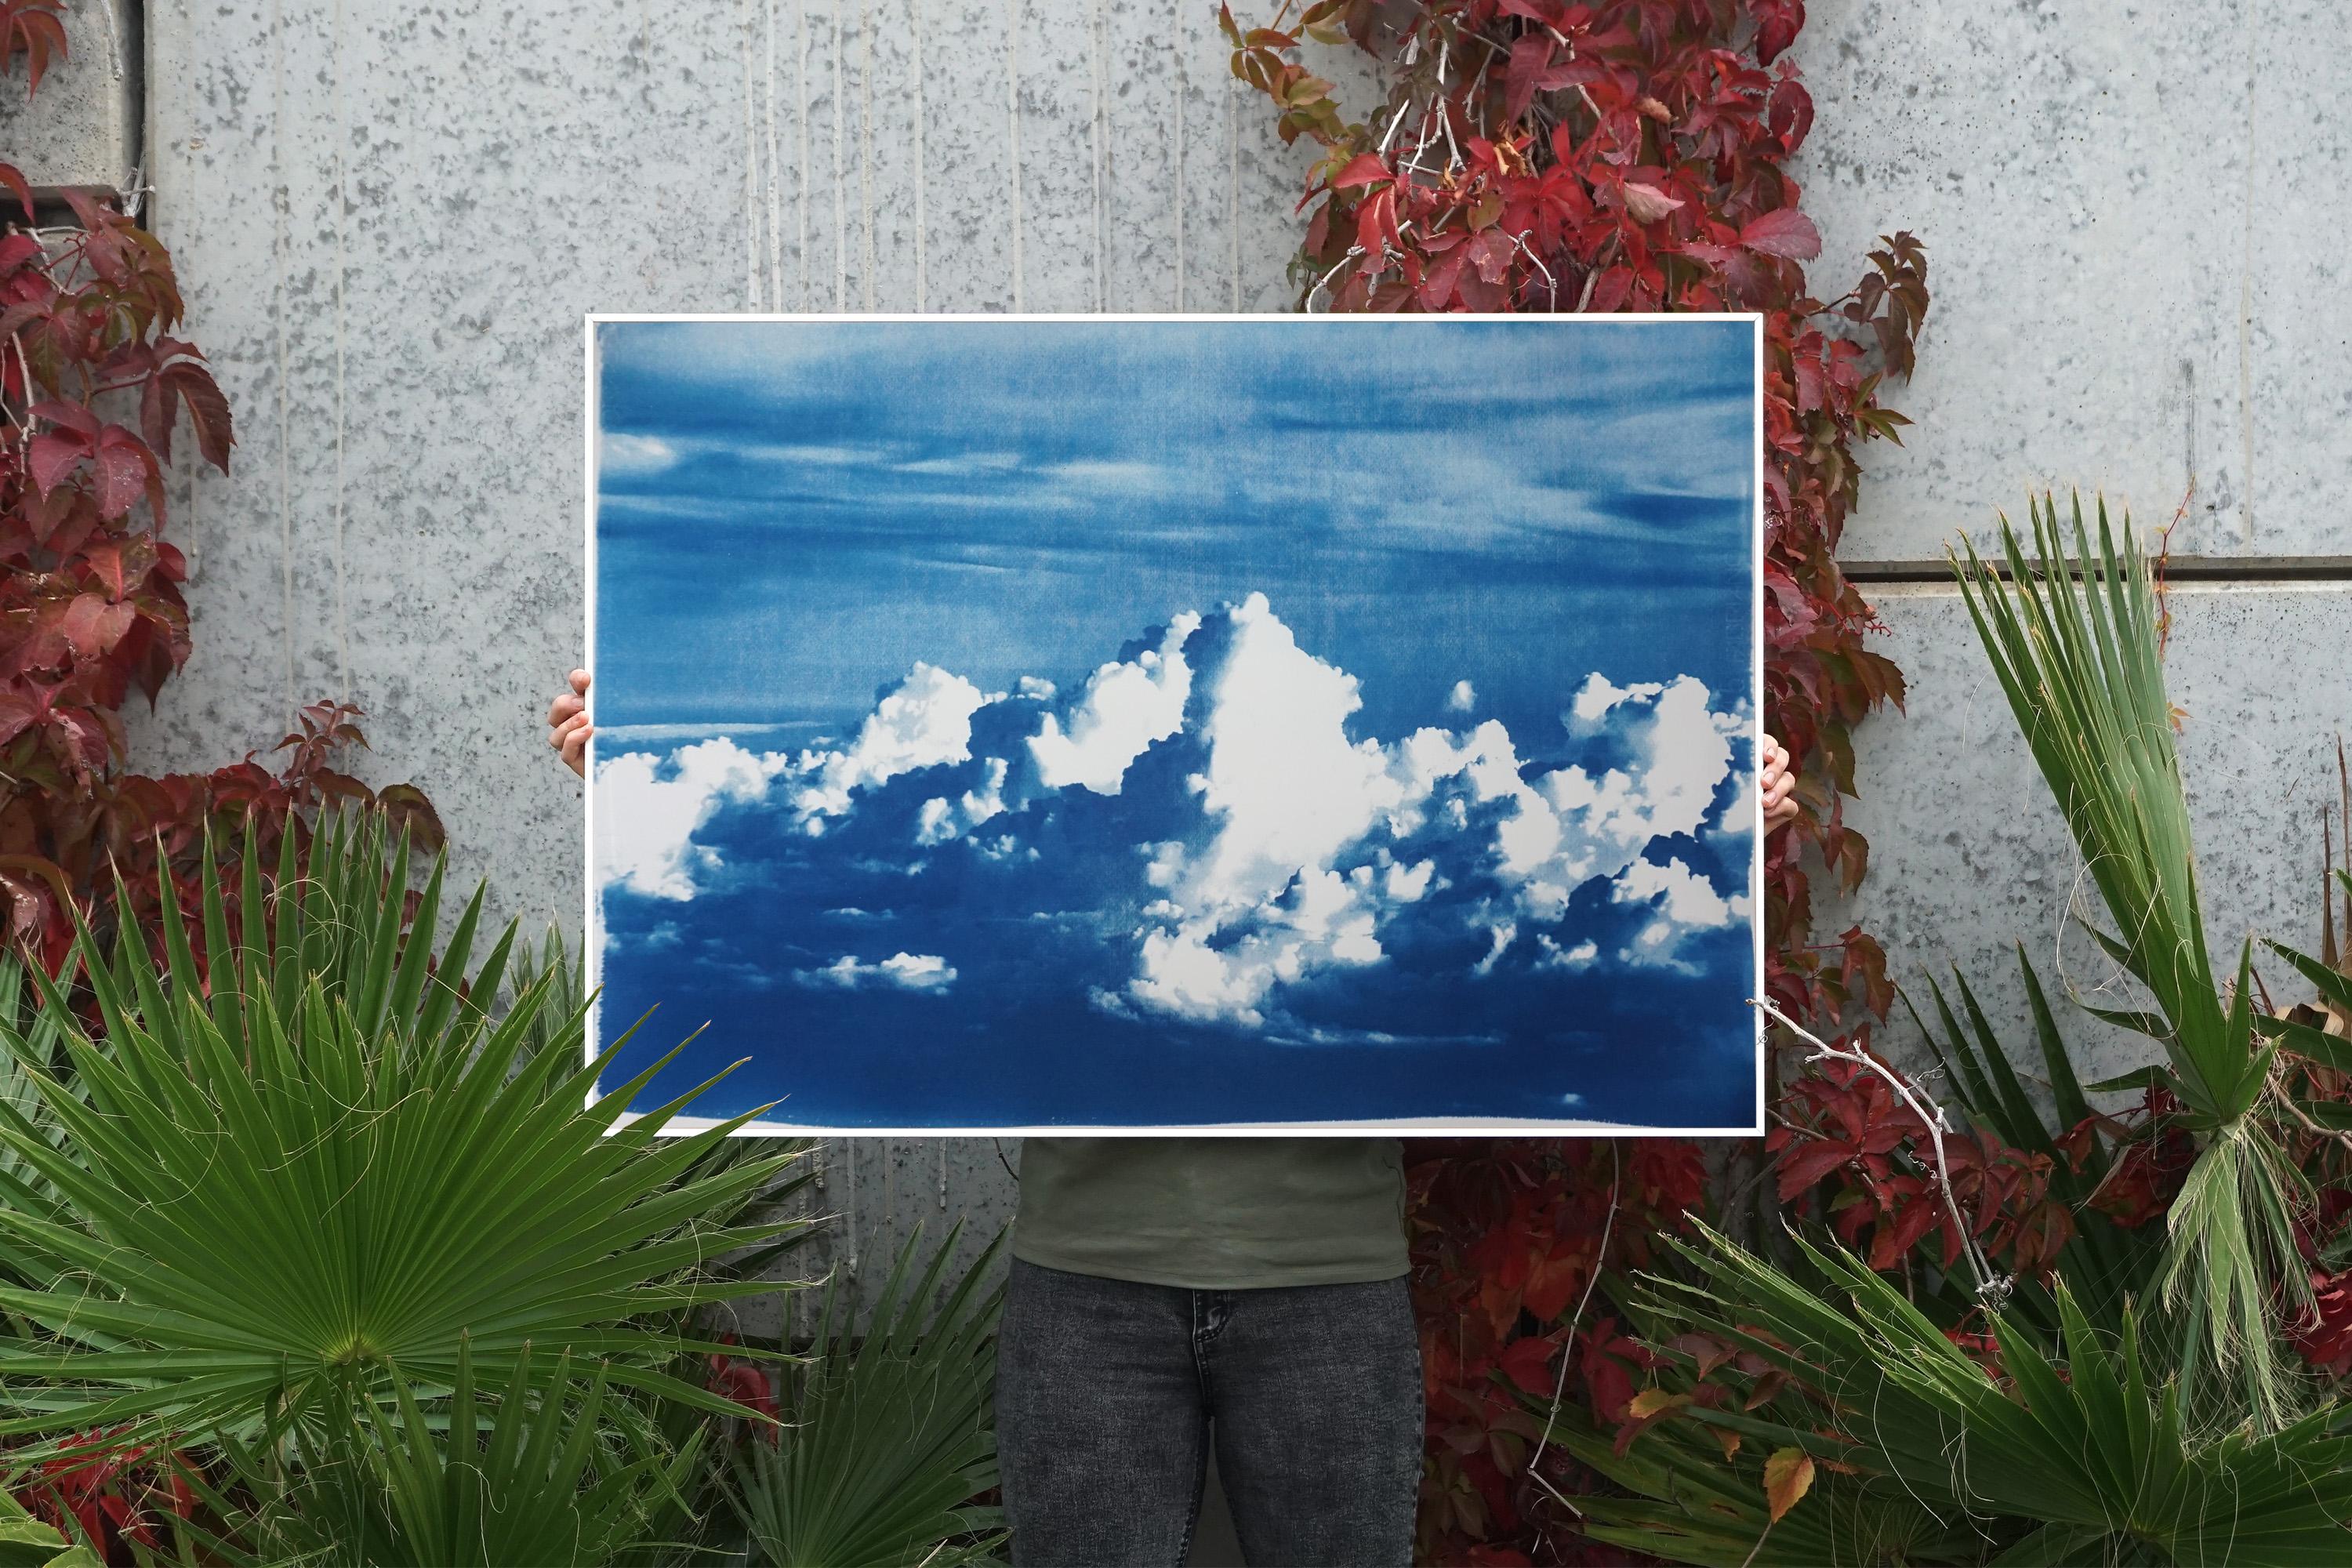 Blustery Clouds After a Storm, Sky Blue Handprinted Cyanotype, Meaningful Scene 3